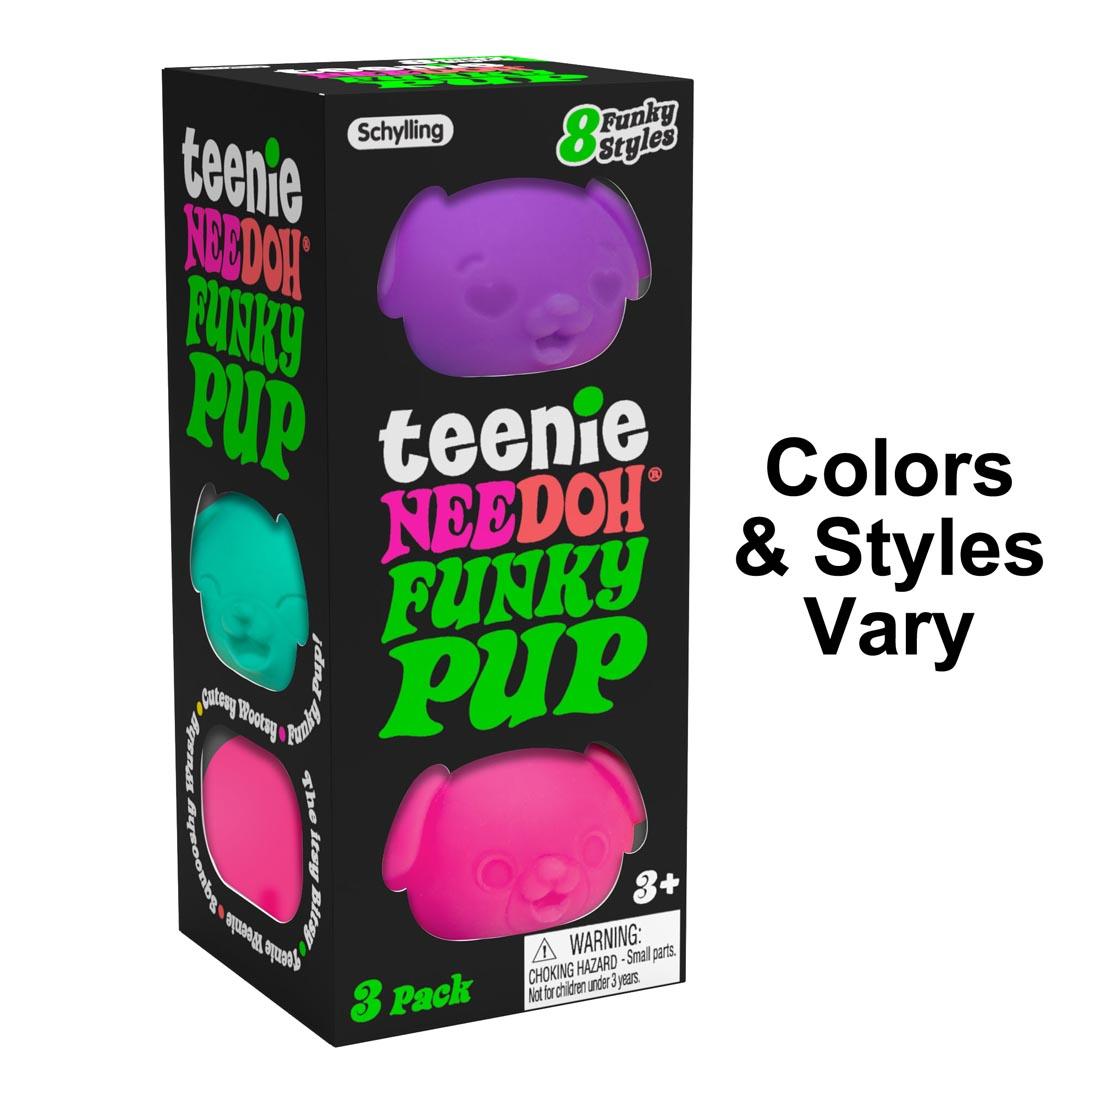 Teenie Nee Doh Funky Pups 3 Pack, with the words "colors & styles vary"